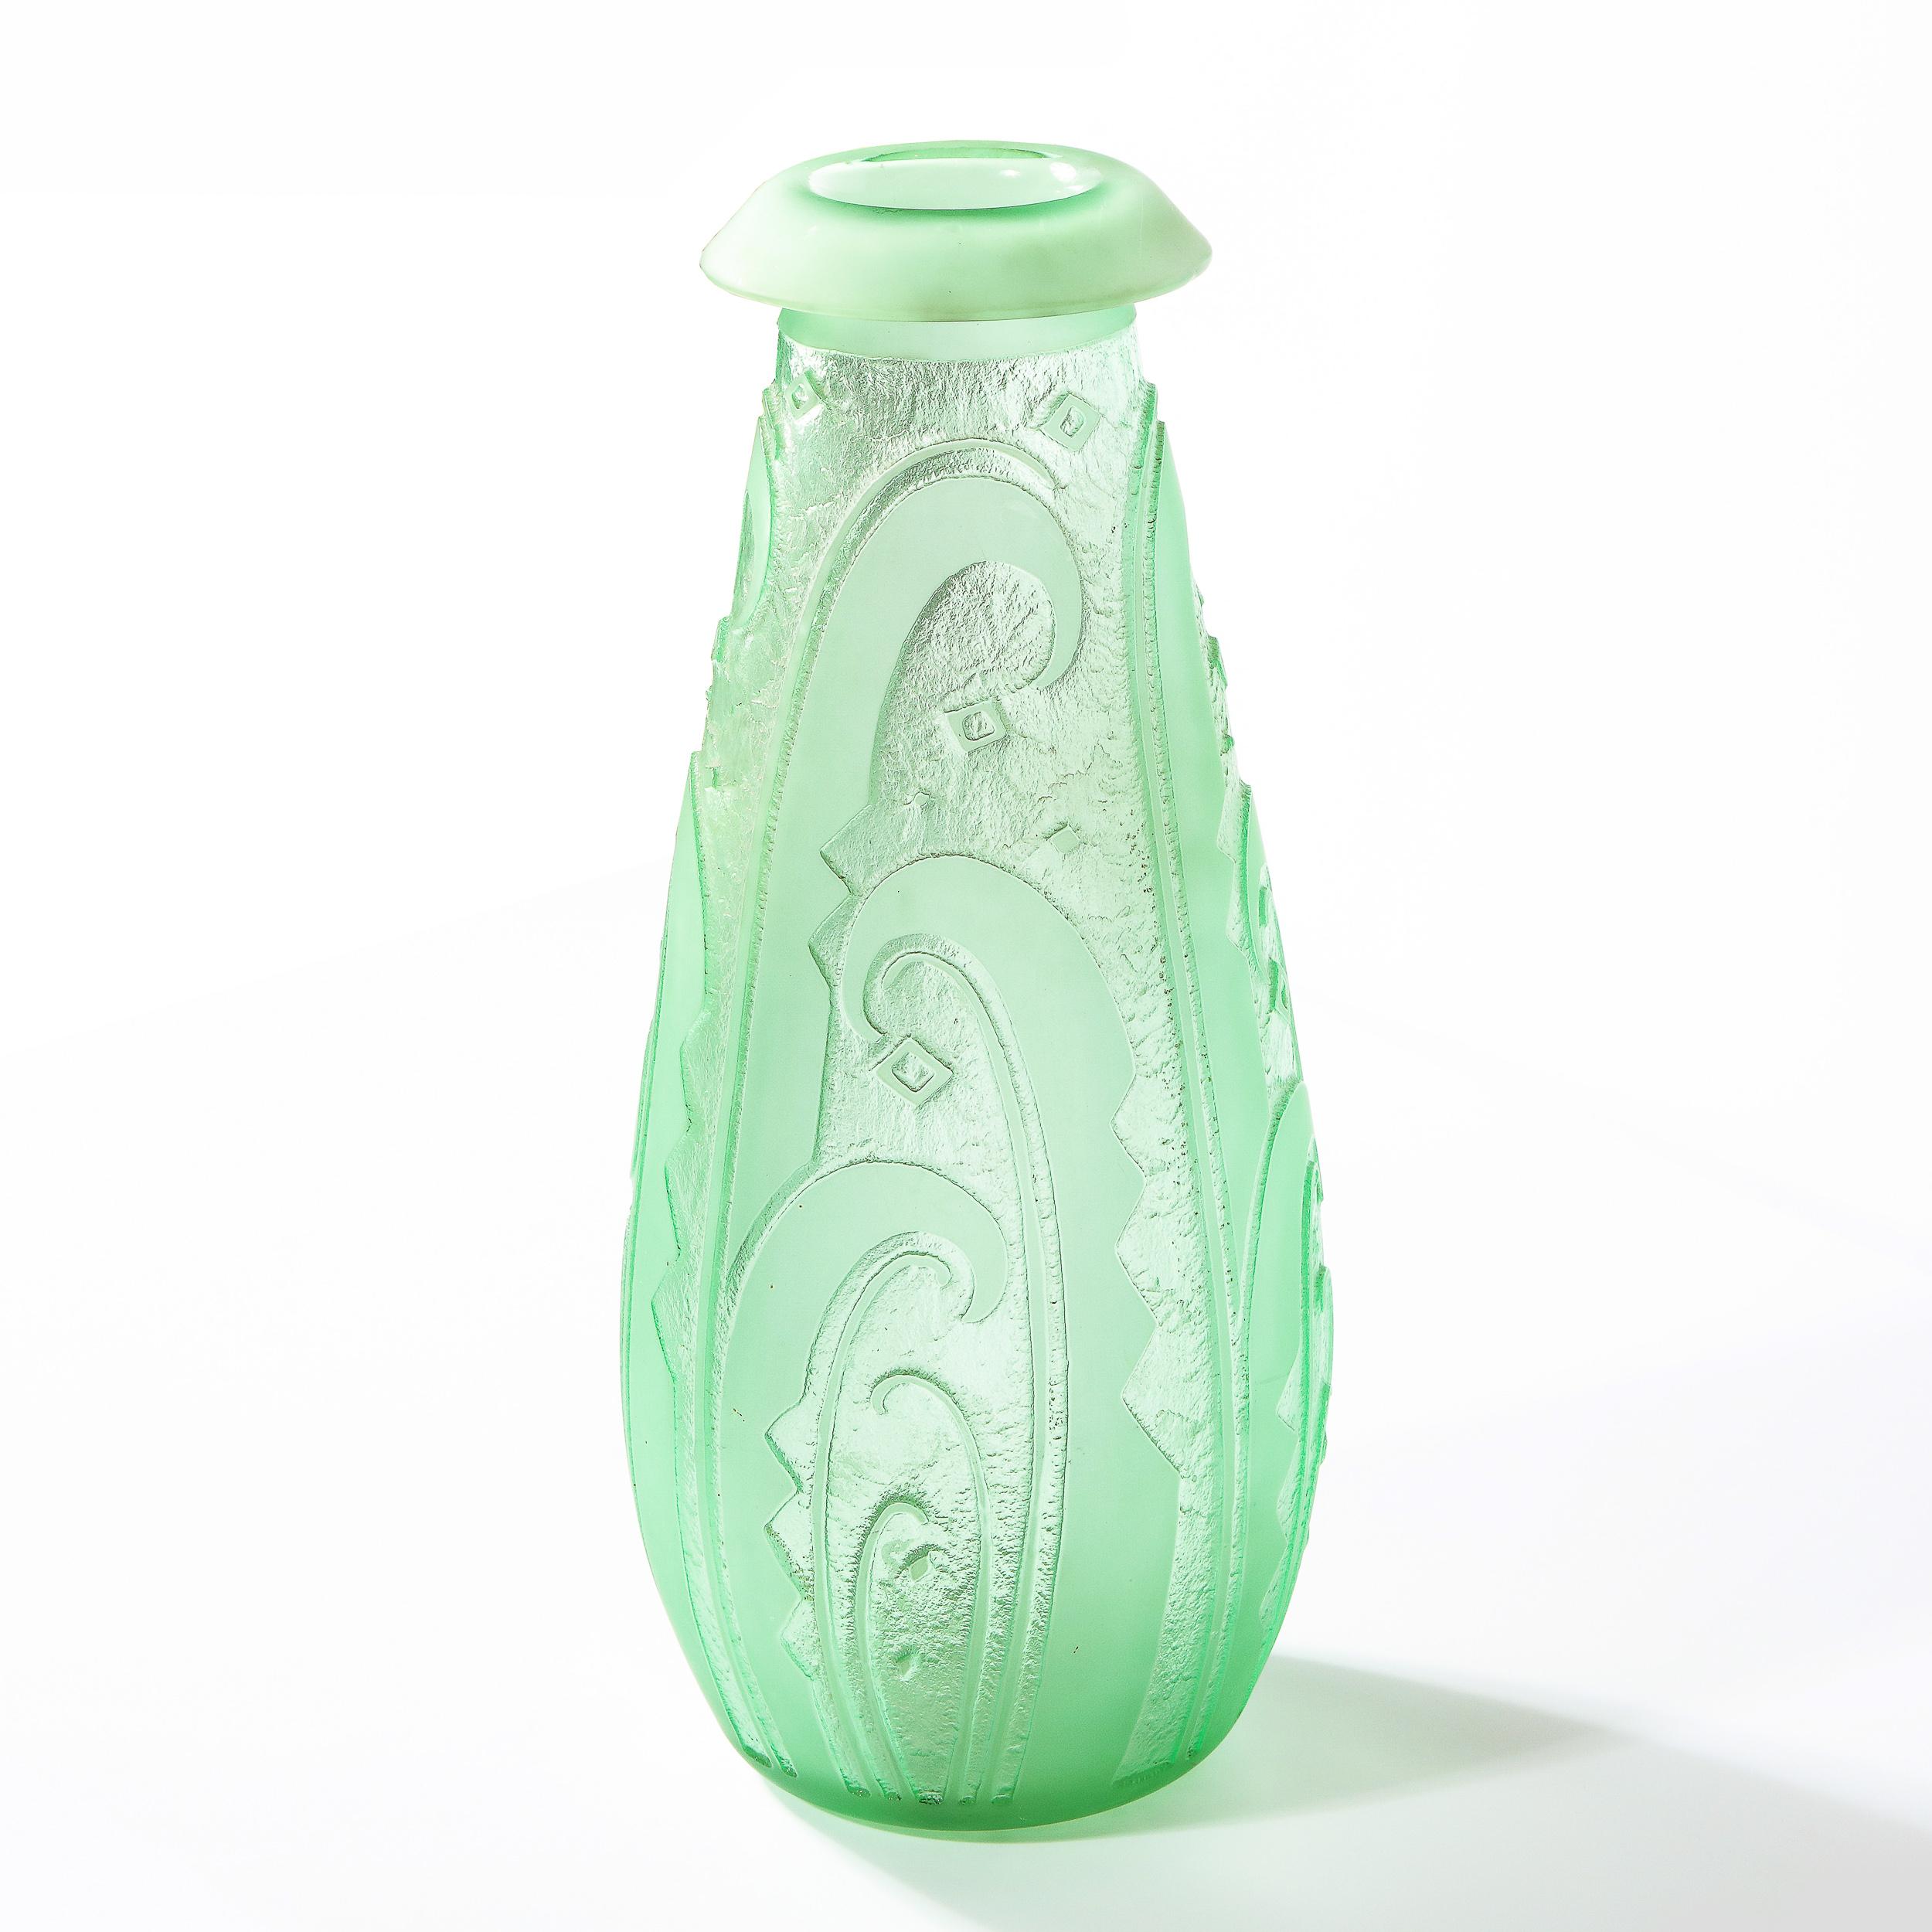 This refined Art Deco vase was realized and signed Nancy Daum in France circa 1930. It features a tapered conical body with a cantilevered mouth in frosted celadon glass with streamlined curvilinear cubist detailing etched throughout the textured